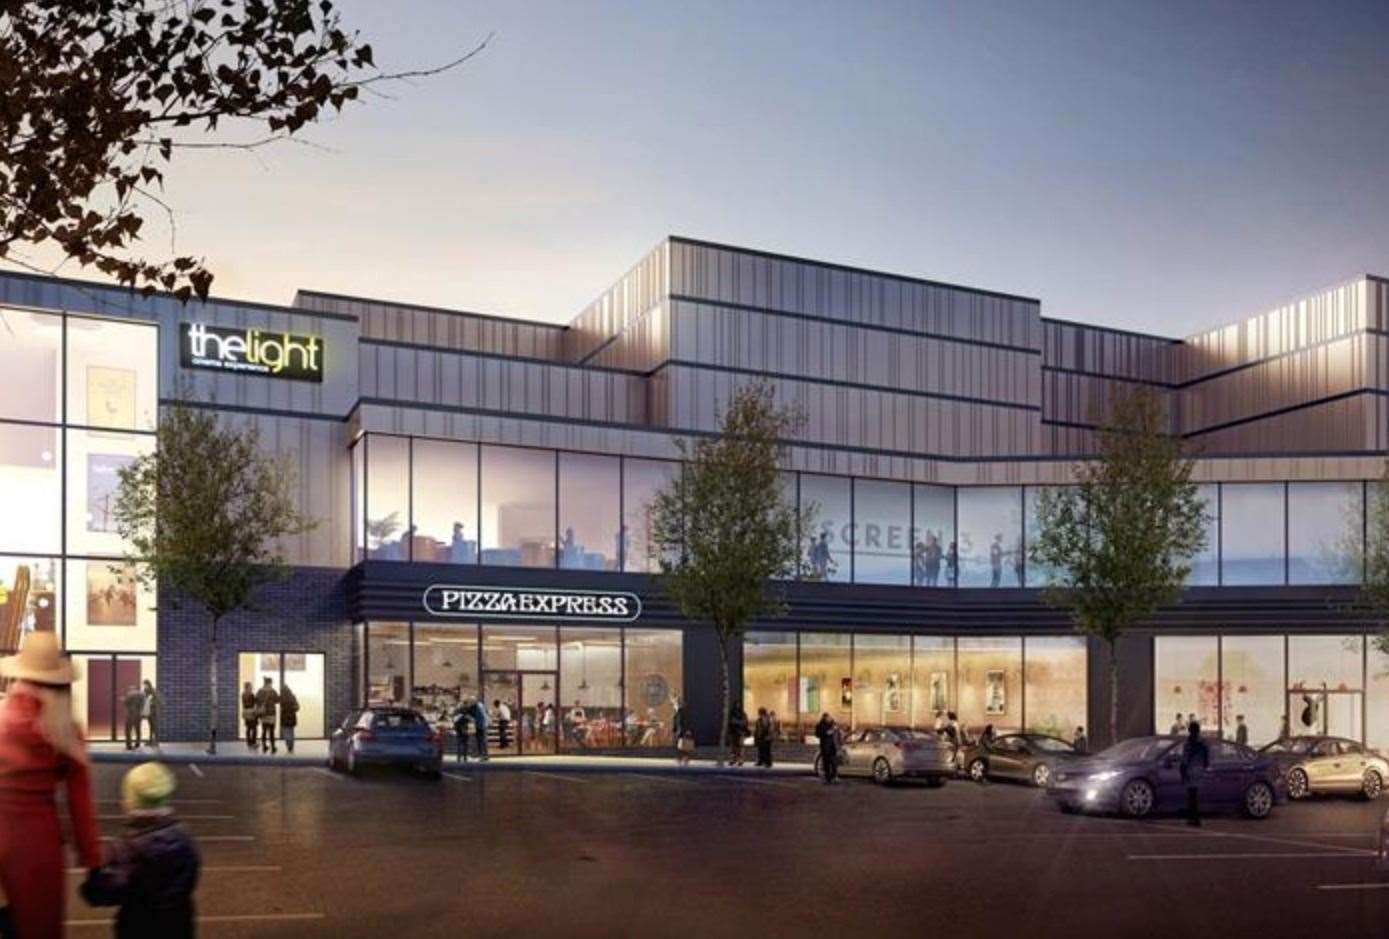 An old artist impressions showing Pizza Express underneath The Light cinema in Sittingbourne